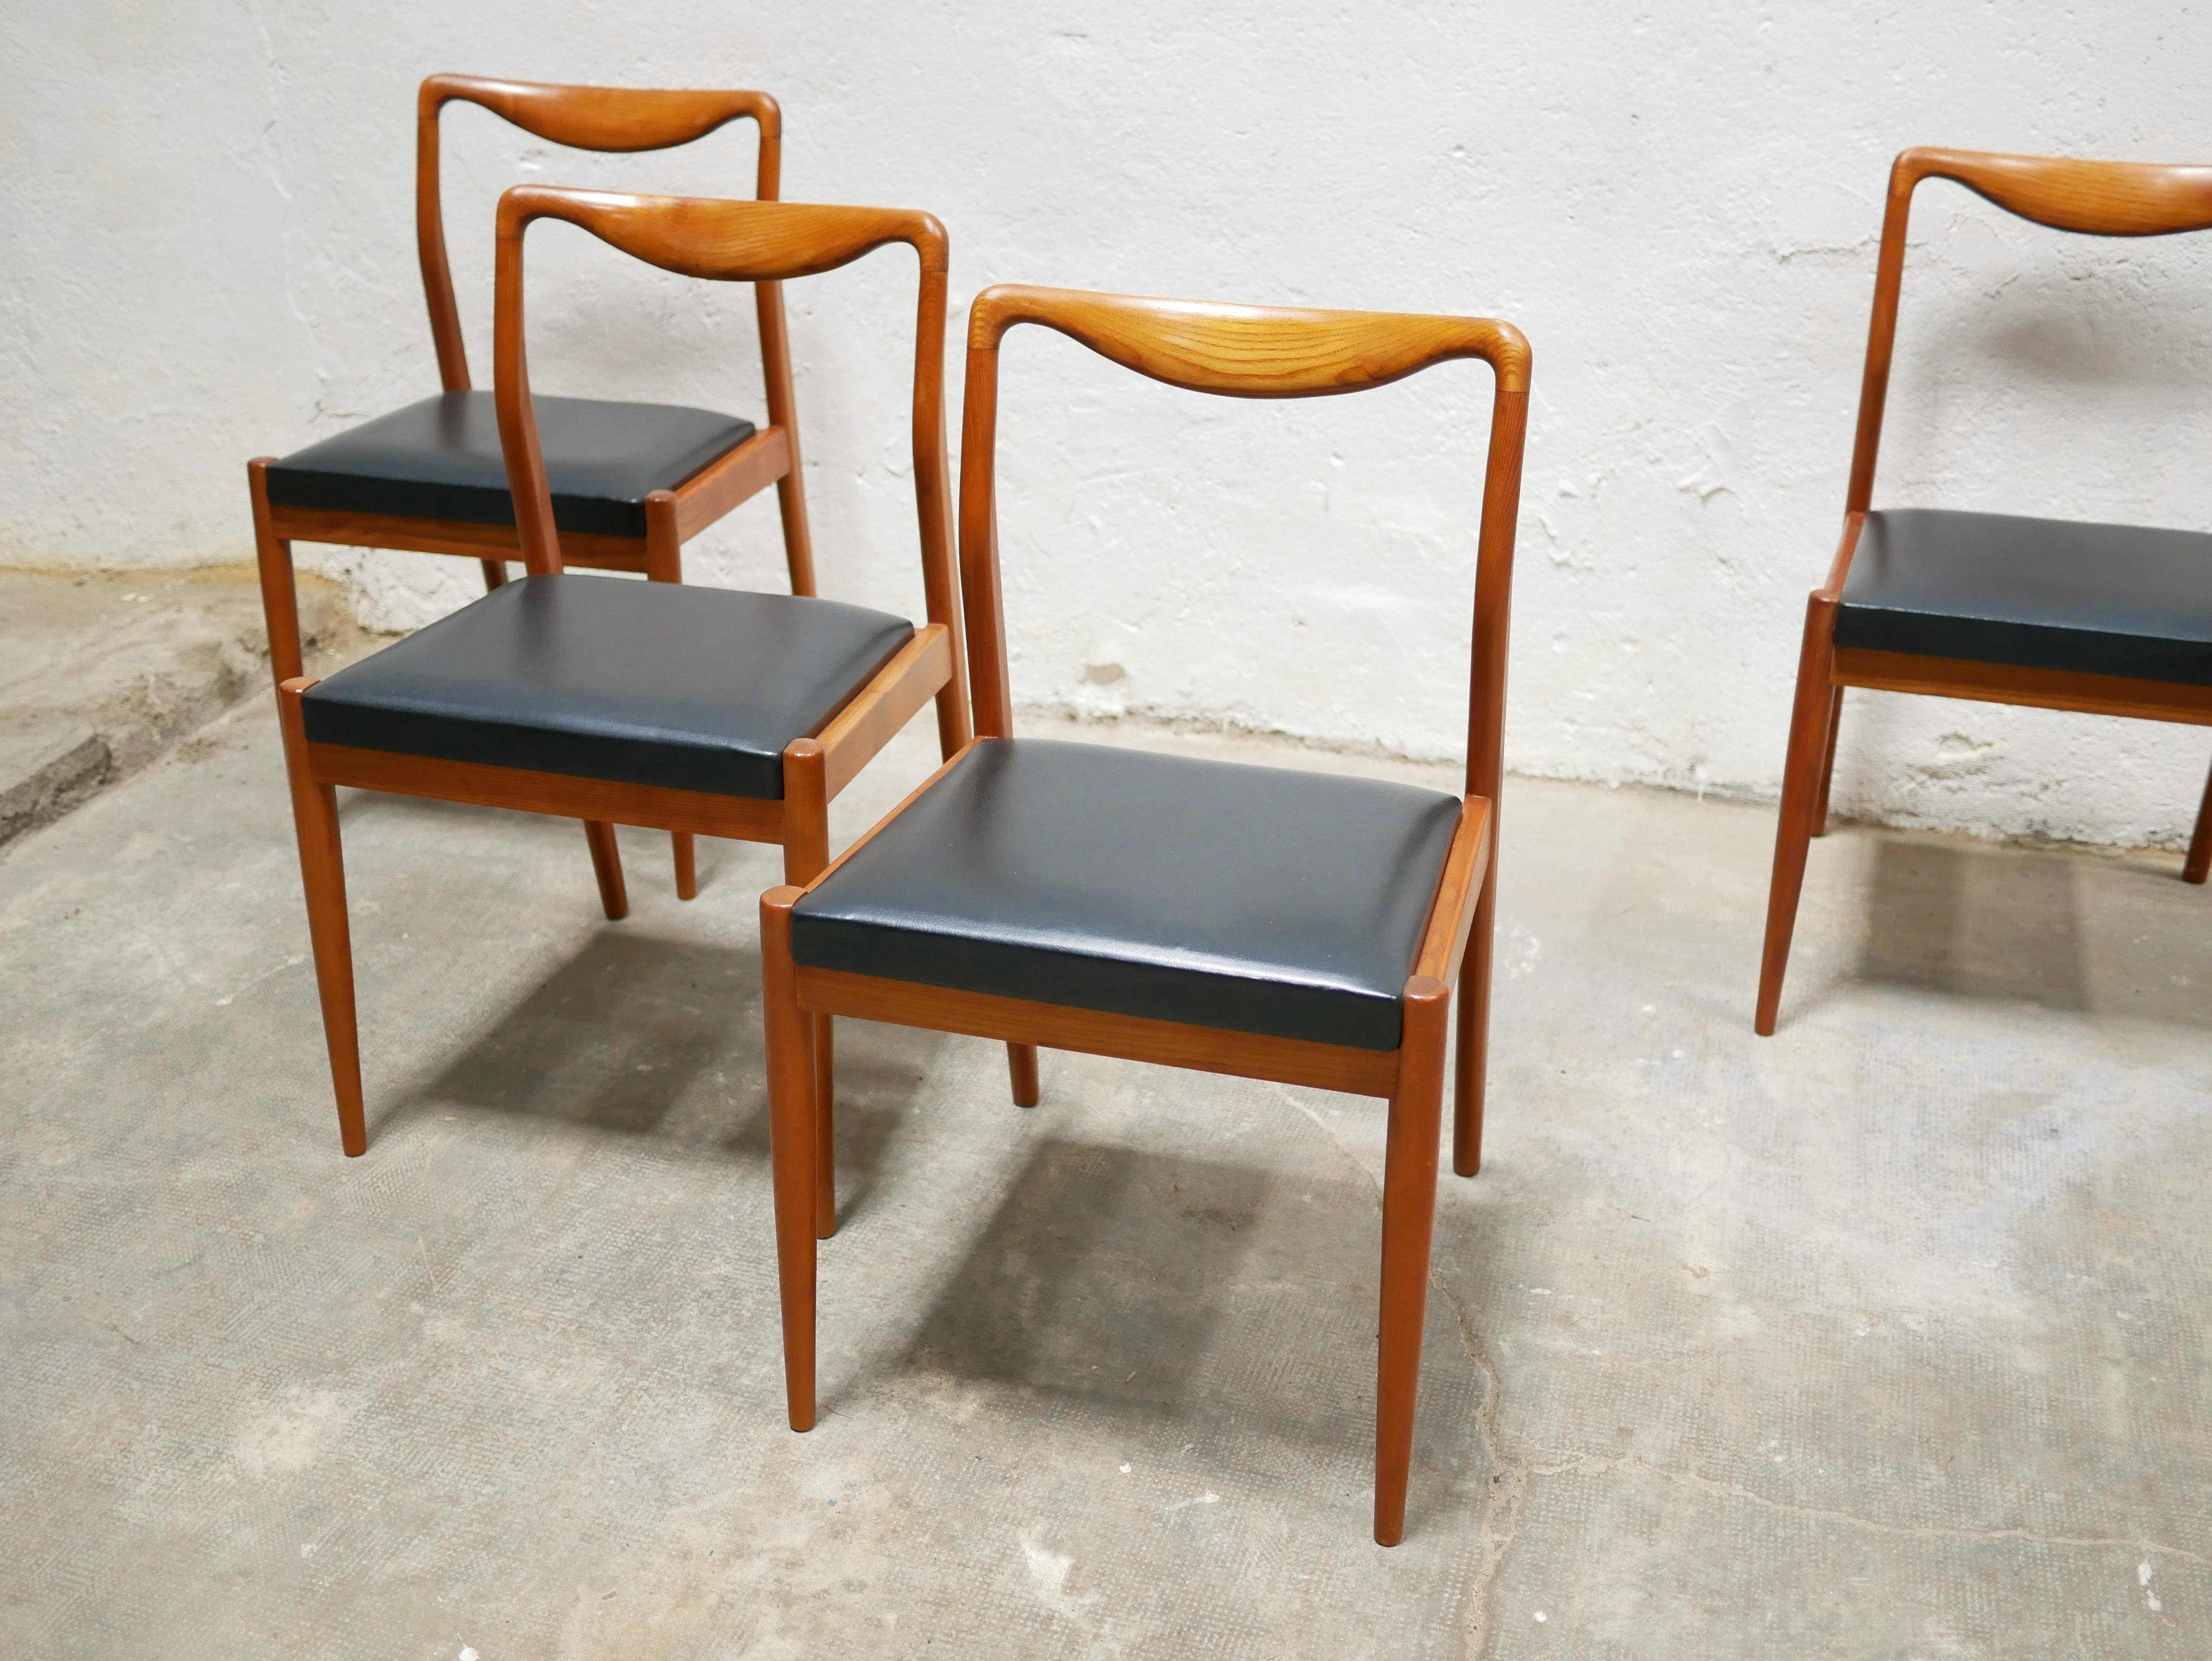 Series of 4 Vintage Scandinavian Chairs in Teak and Leatherette For Sale 6